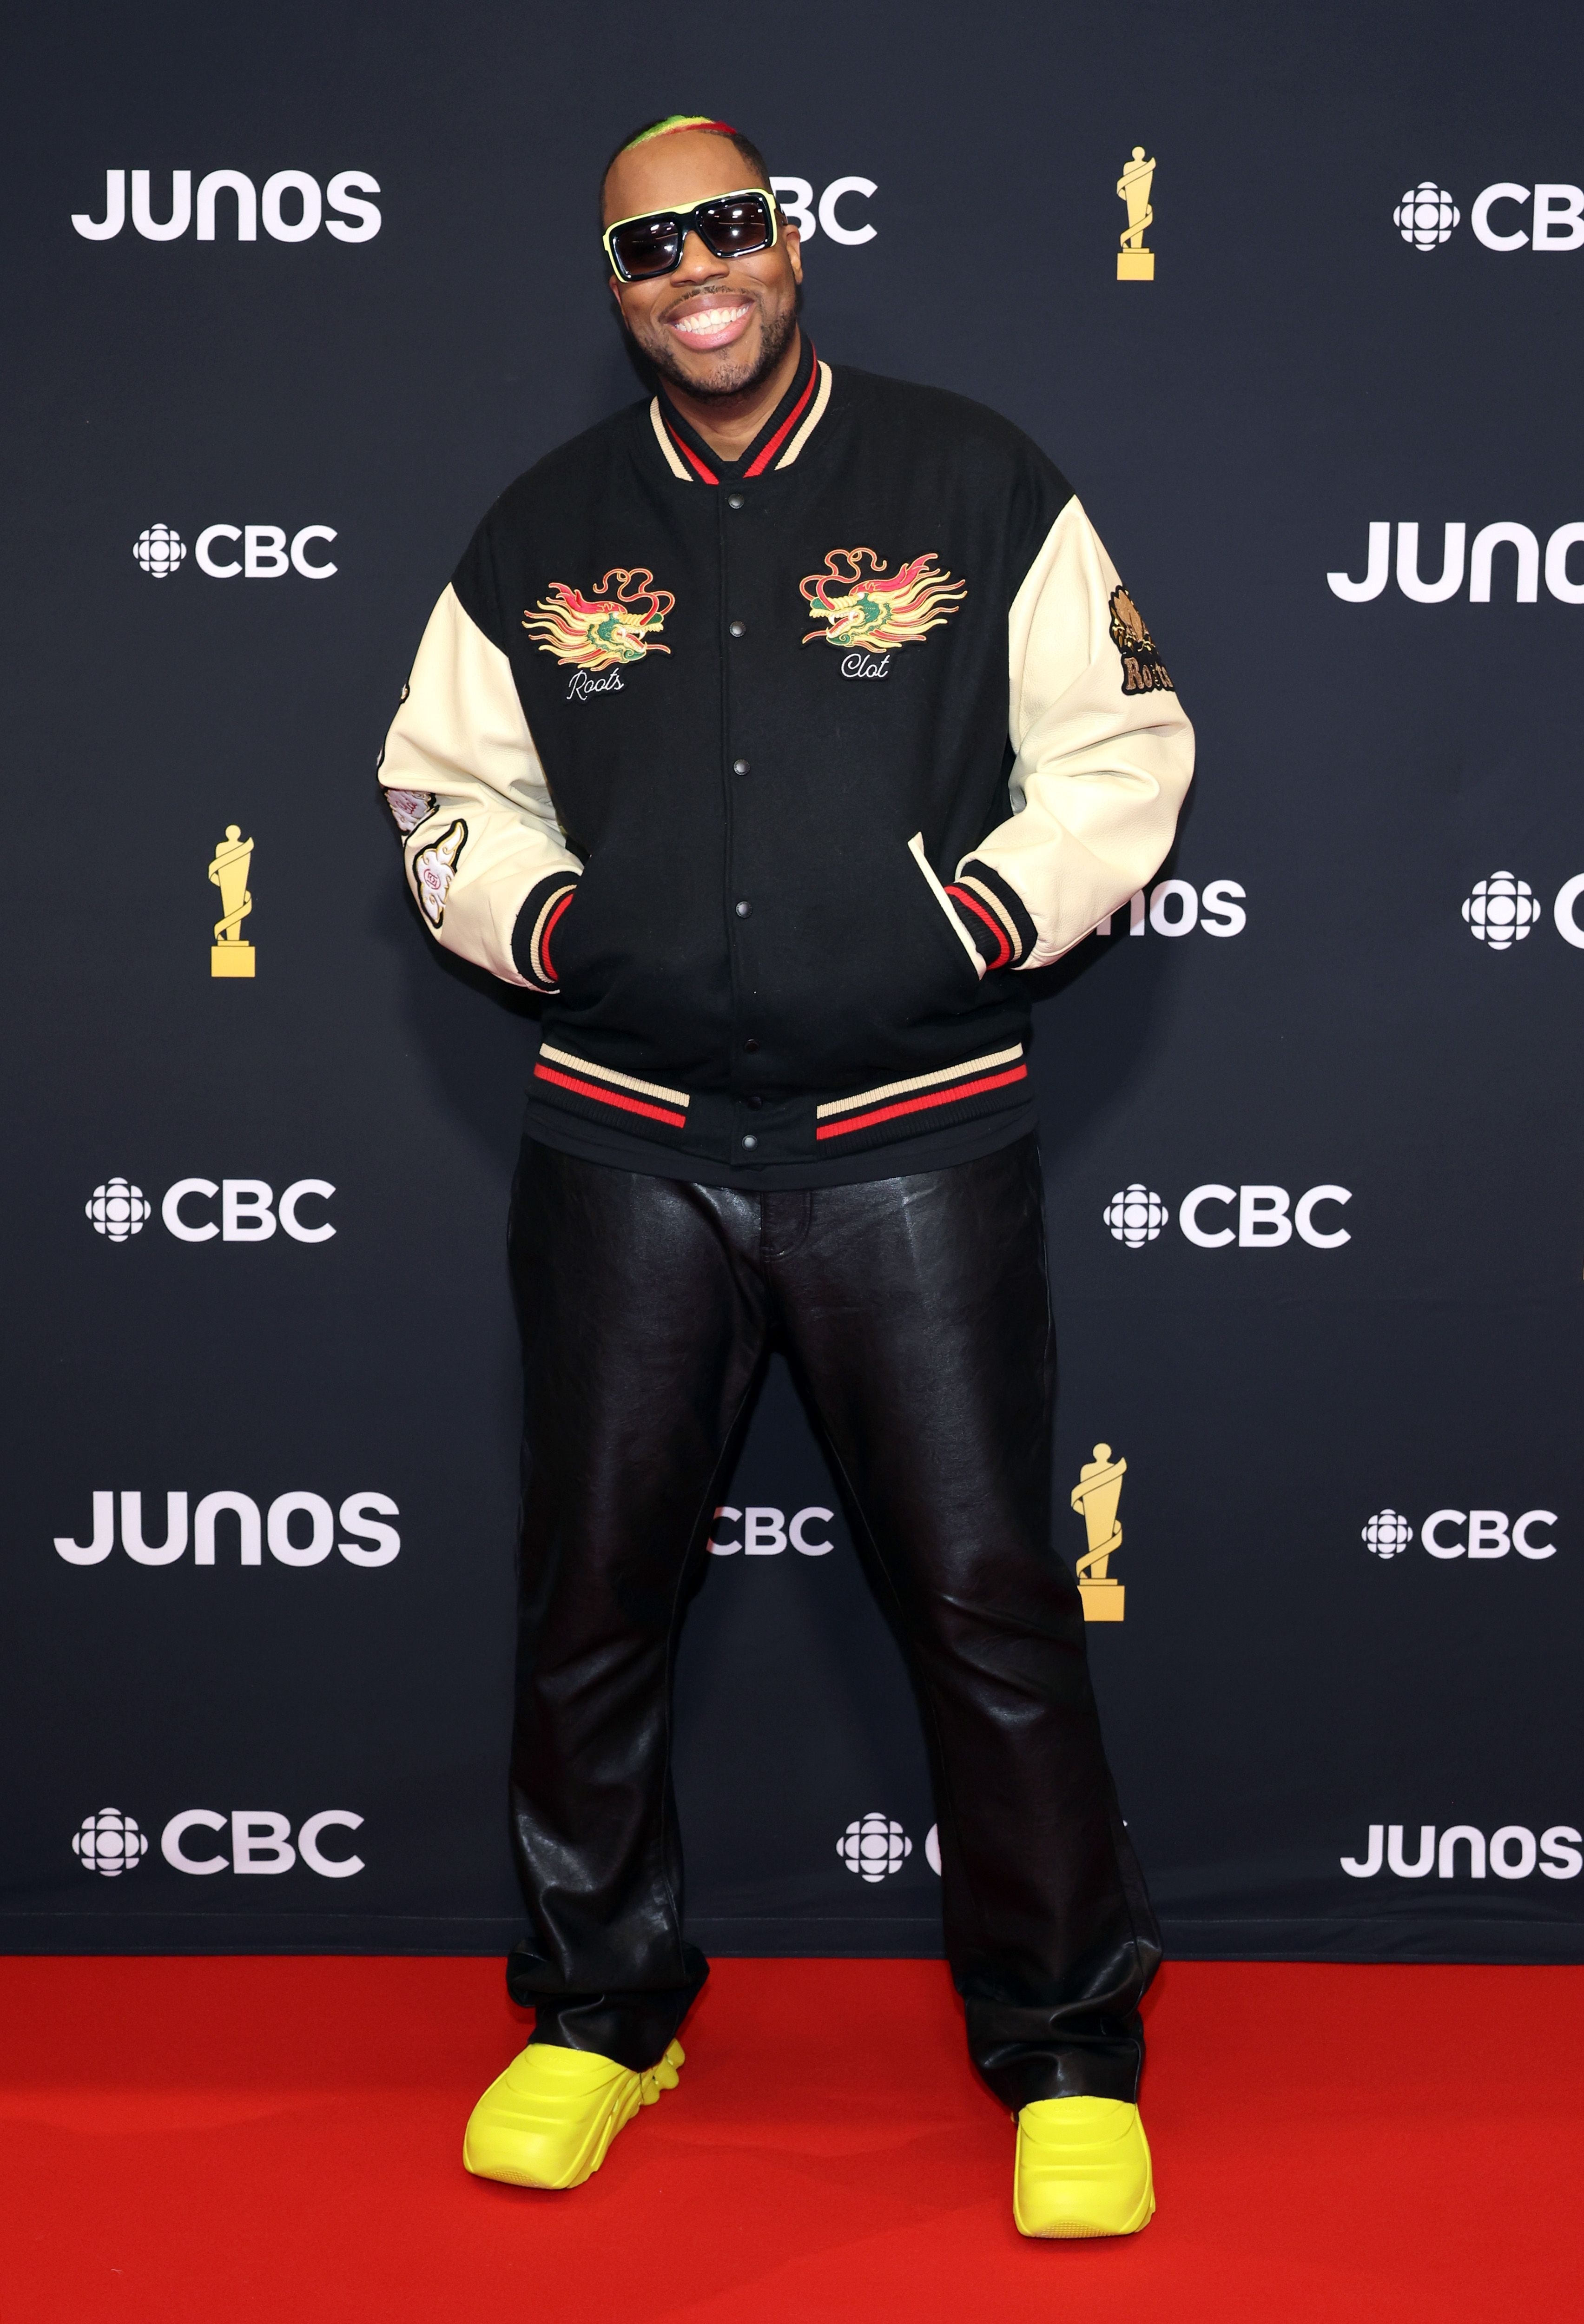 Man in a varsity jacket and bright sneakers posing at the Junos event